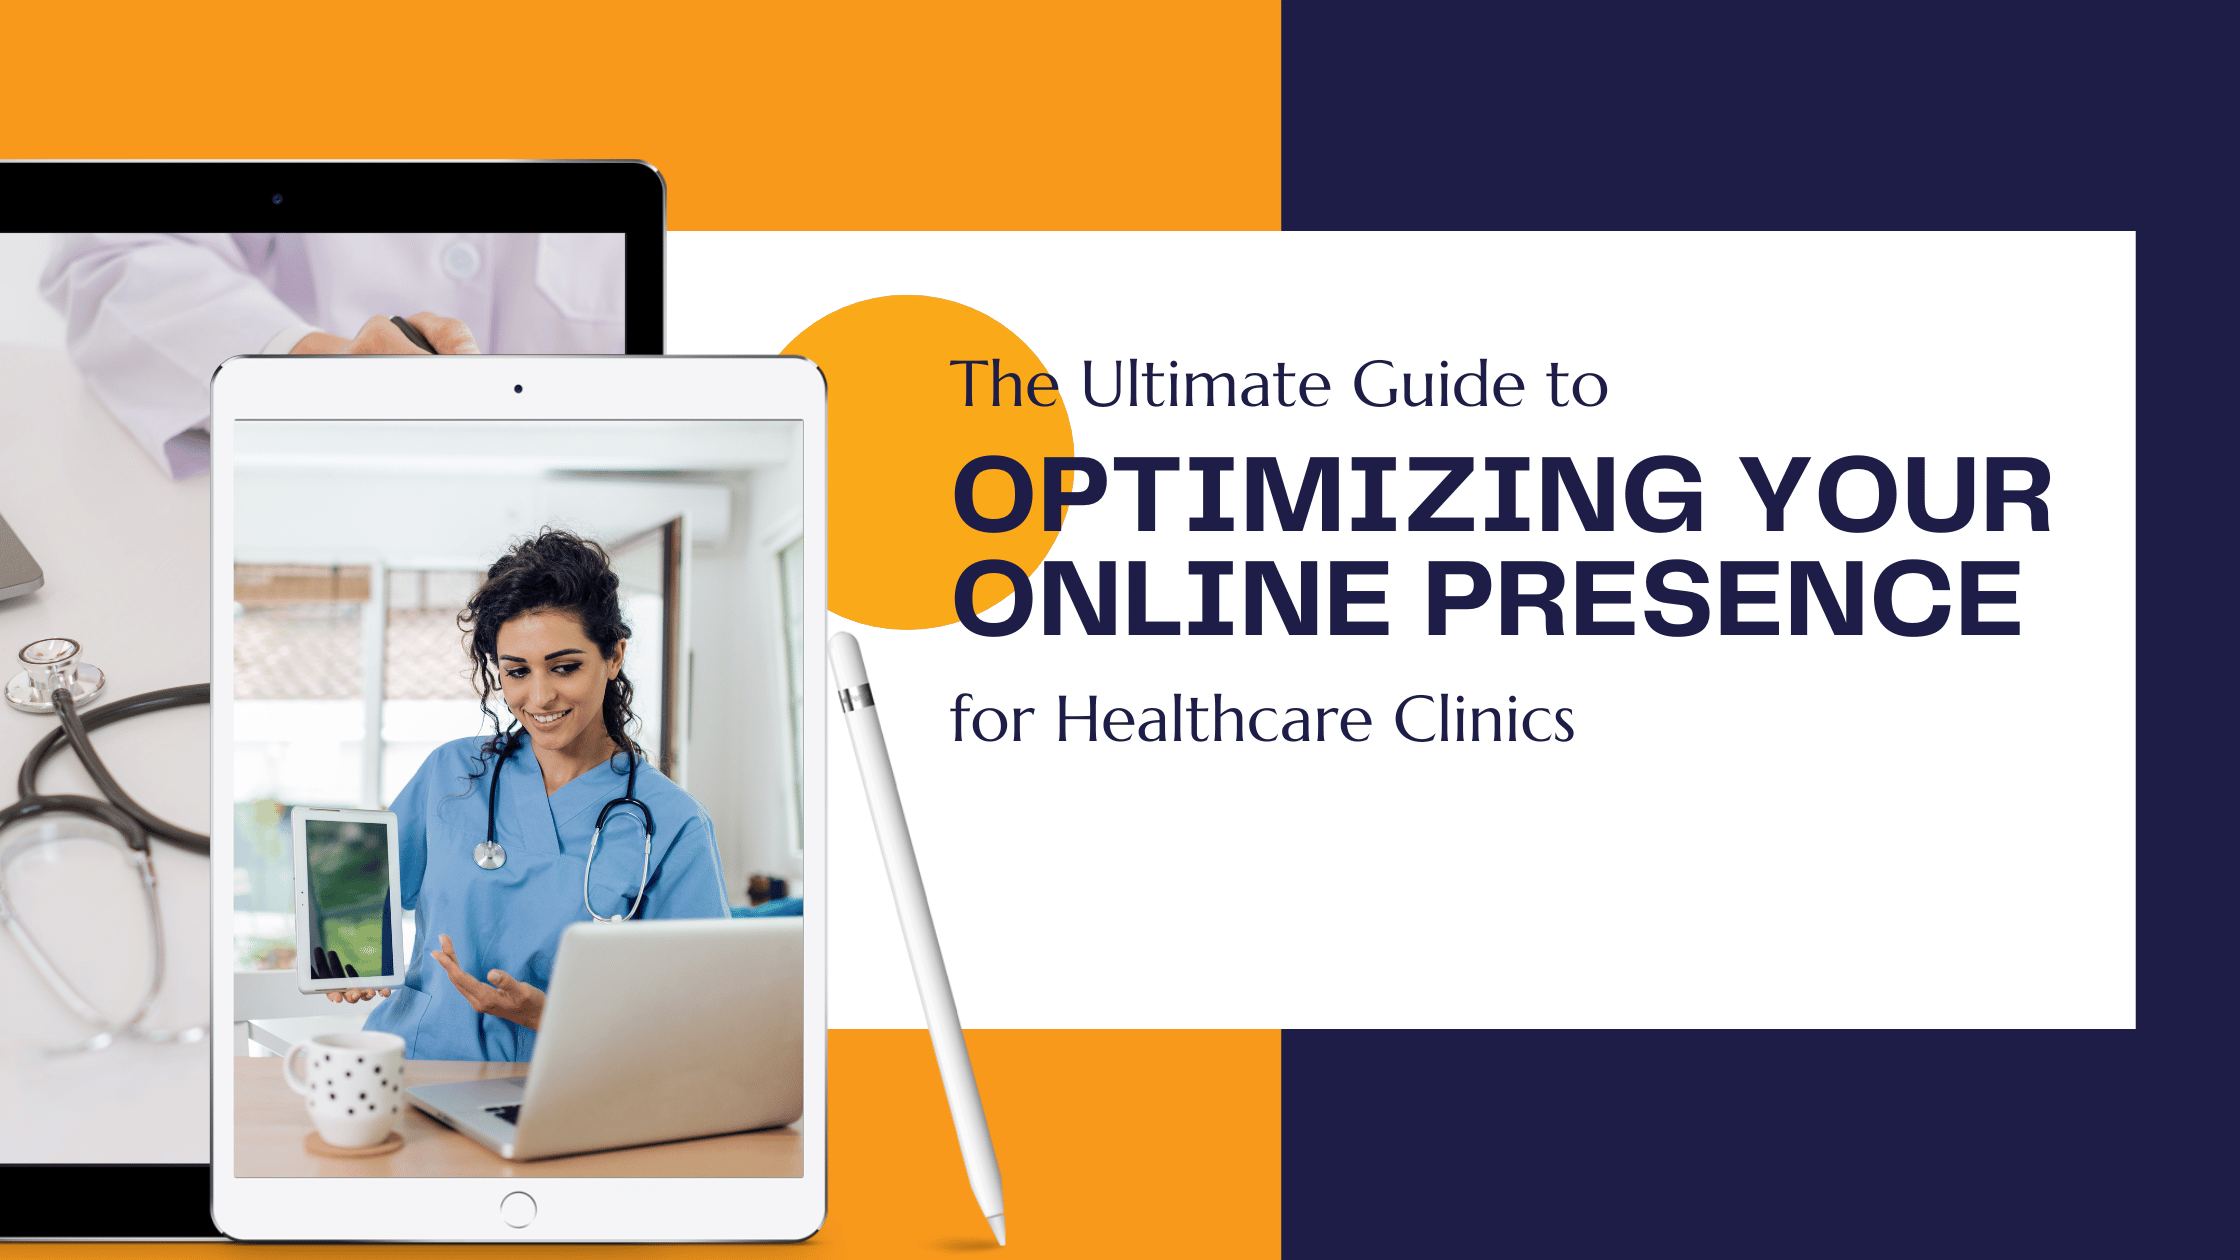 The Ultimate Guide to Optimizing Your Online Presence for Healthcare Clinics